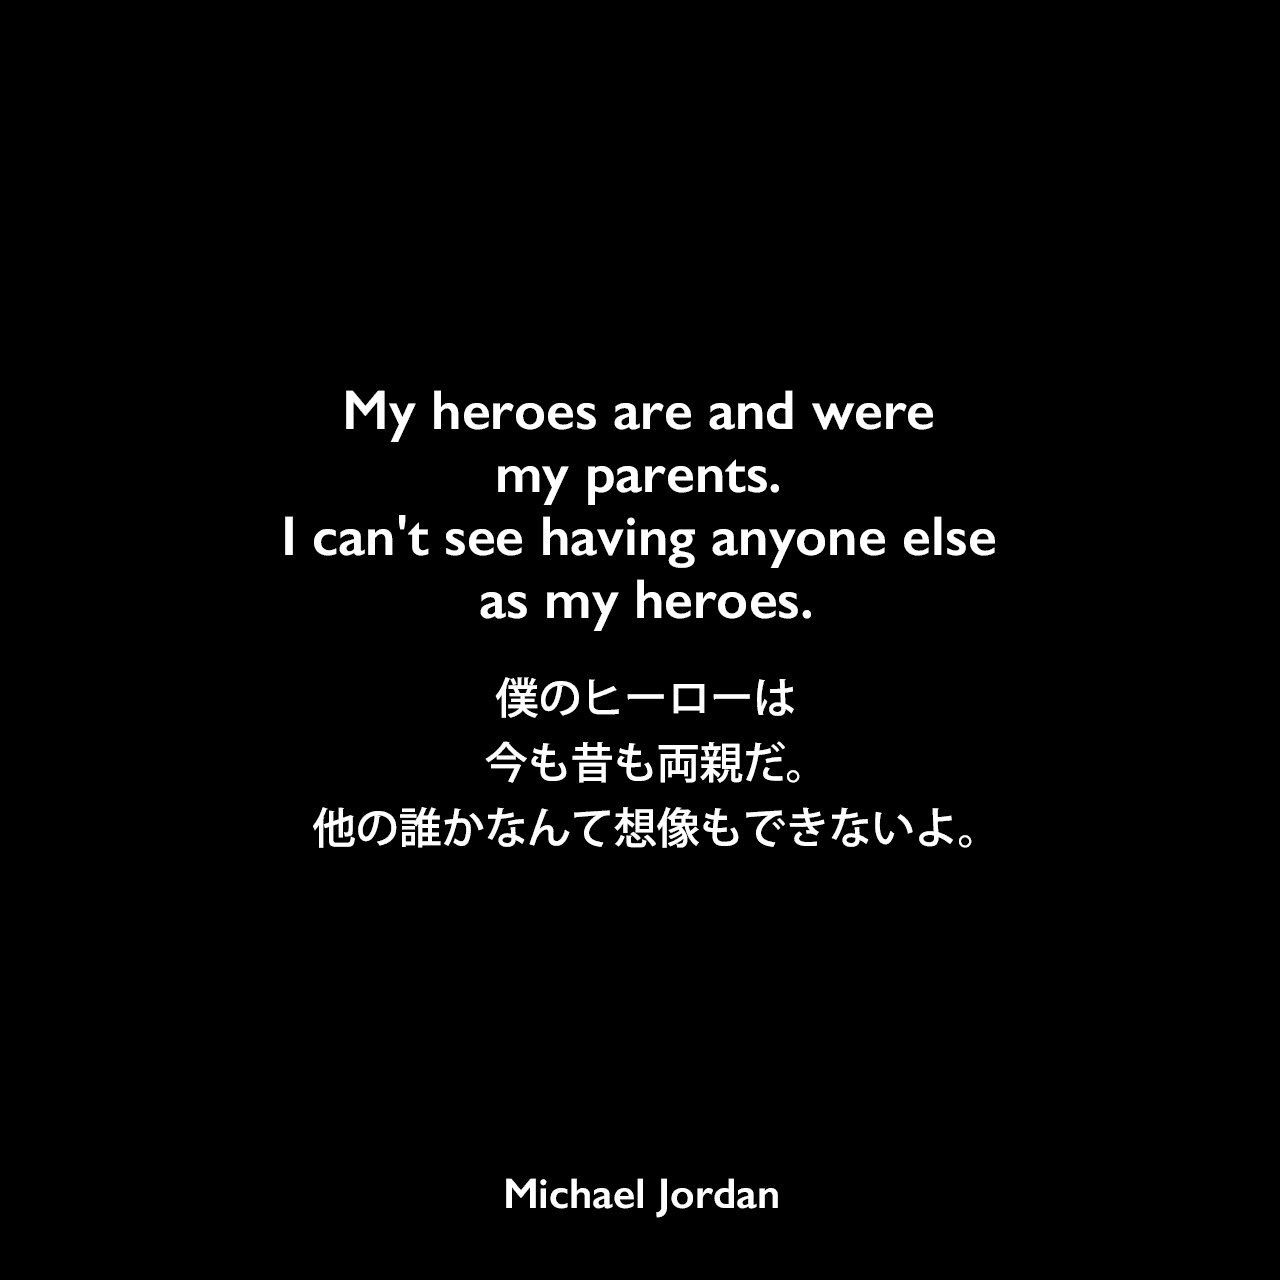 My heroes are and were my parents. I can't see having anyone else as my heroes.僕のヒーローは今も昔も両親だ。他の誰かなんて想像もできないよ。Michael Jordan